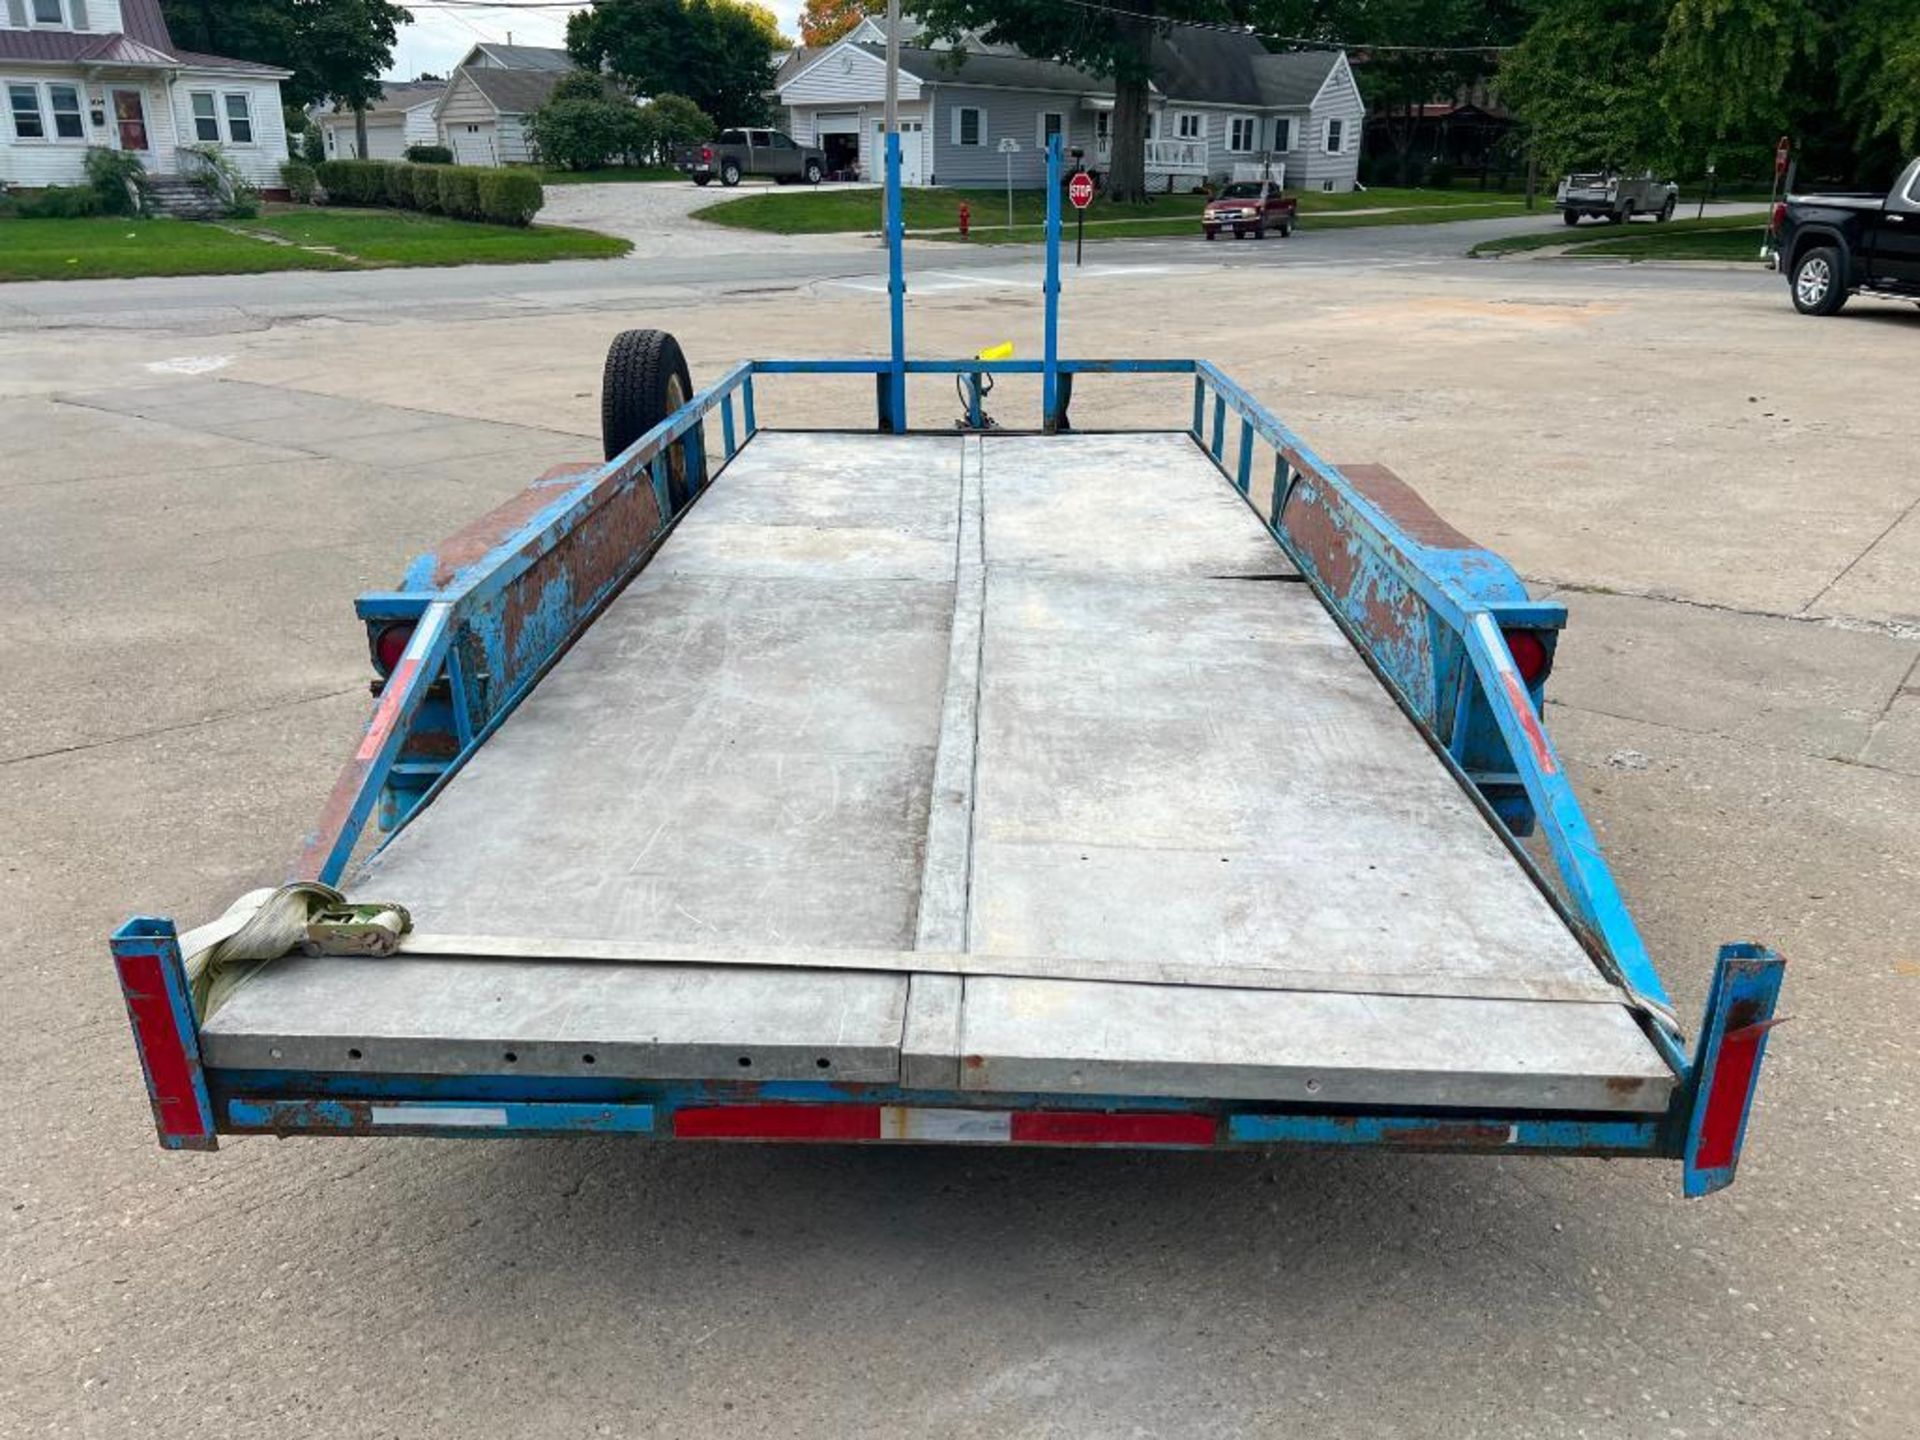 1988 Brewer Utility Trailer, VIN #068814, Flatbed 16' x 76", Dual Axle with Spare Tire & Pintail Rin - Image 5 of 6